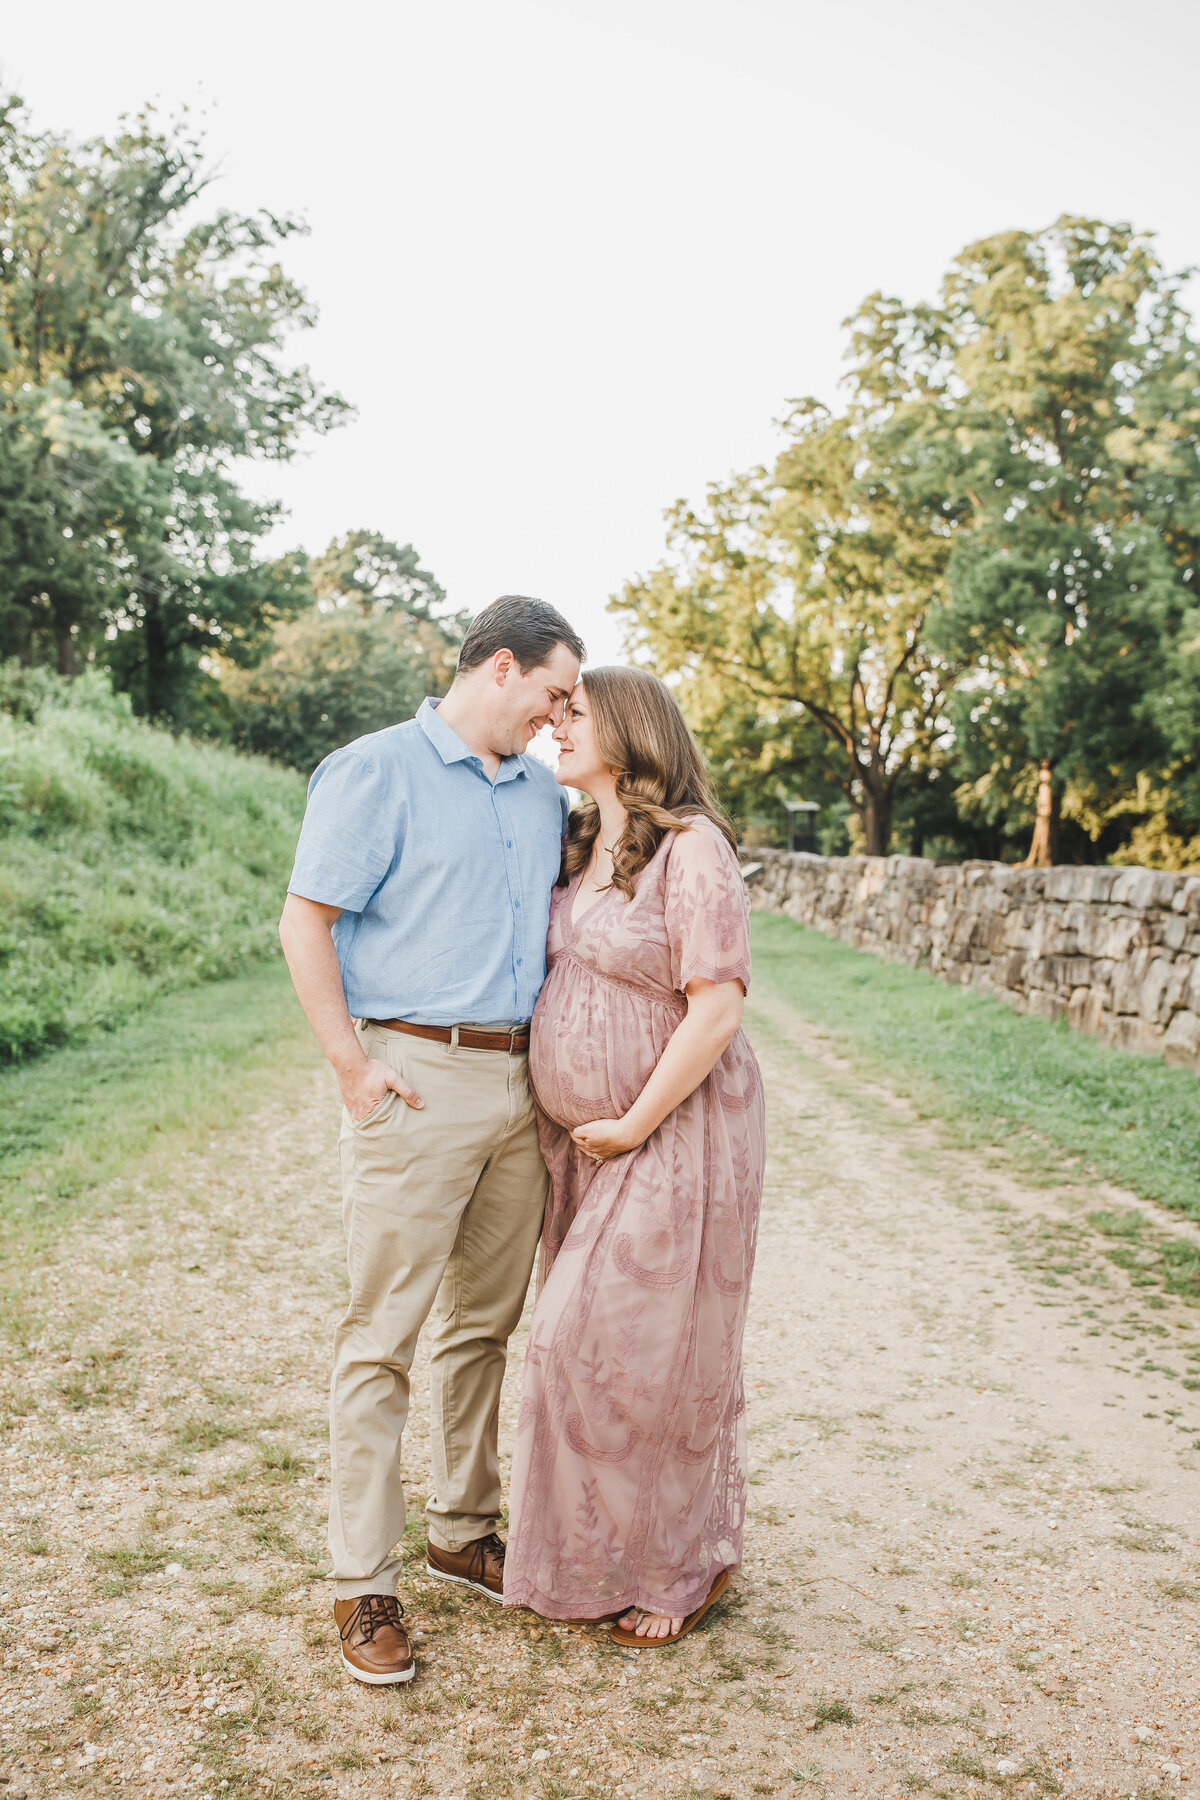 Lawson - Virginia Maternity Photographer - Photography by Amy Nicole-352-9